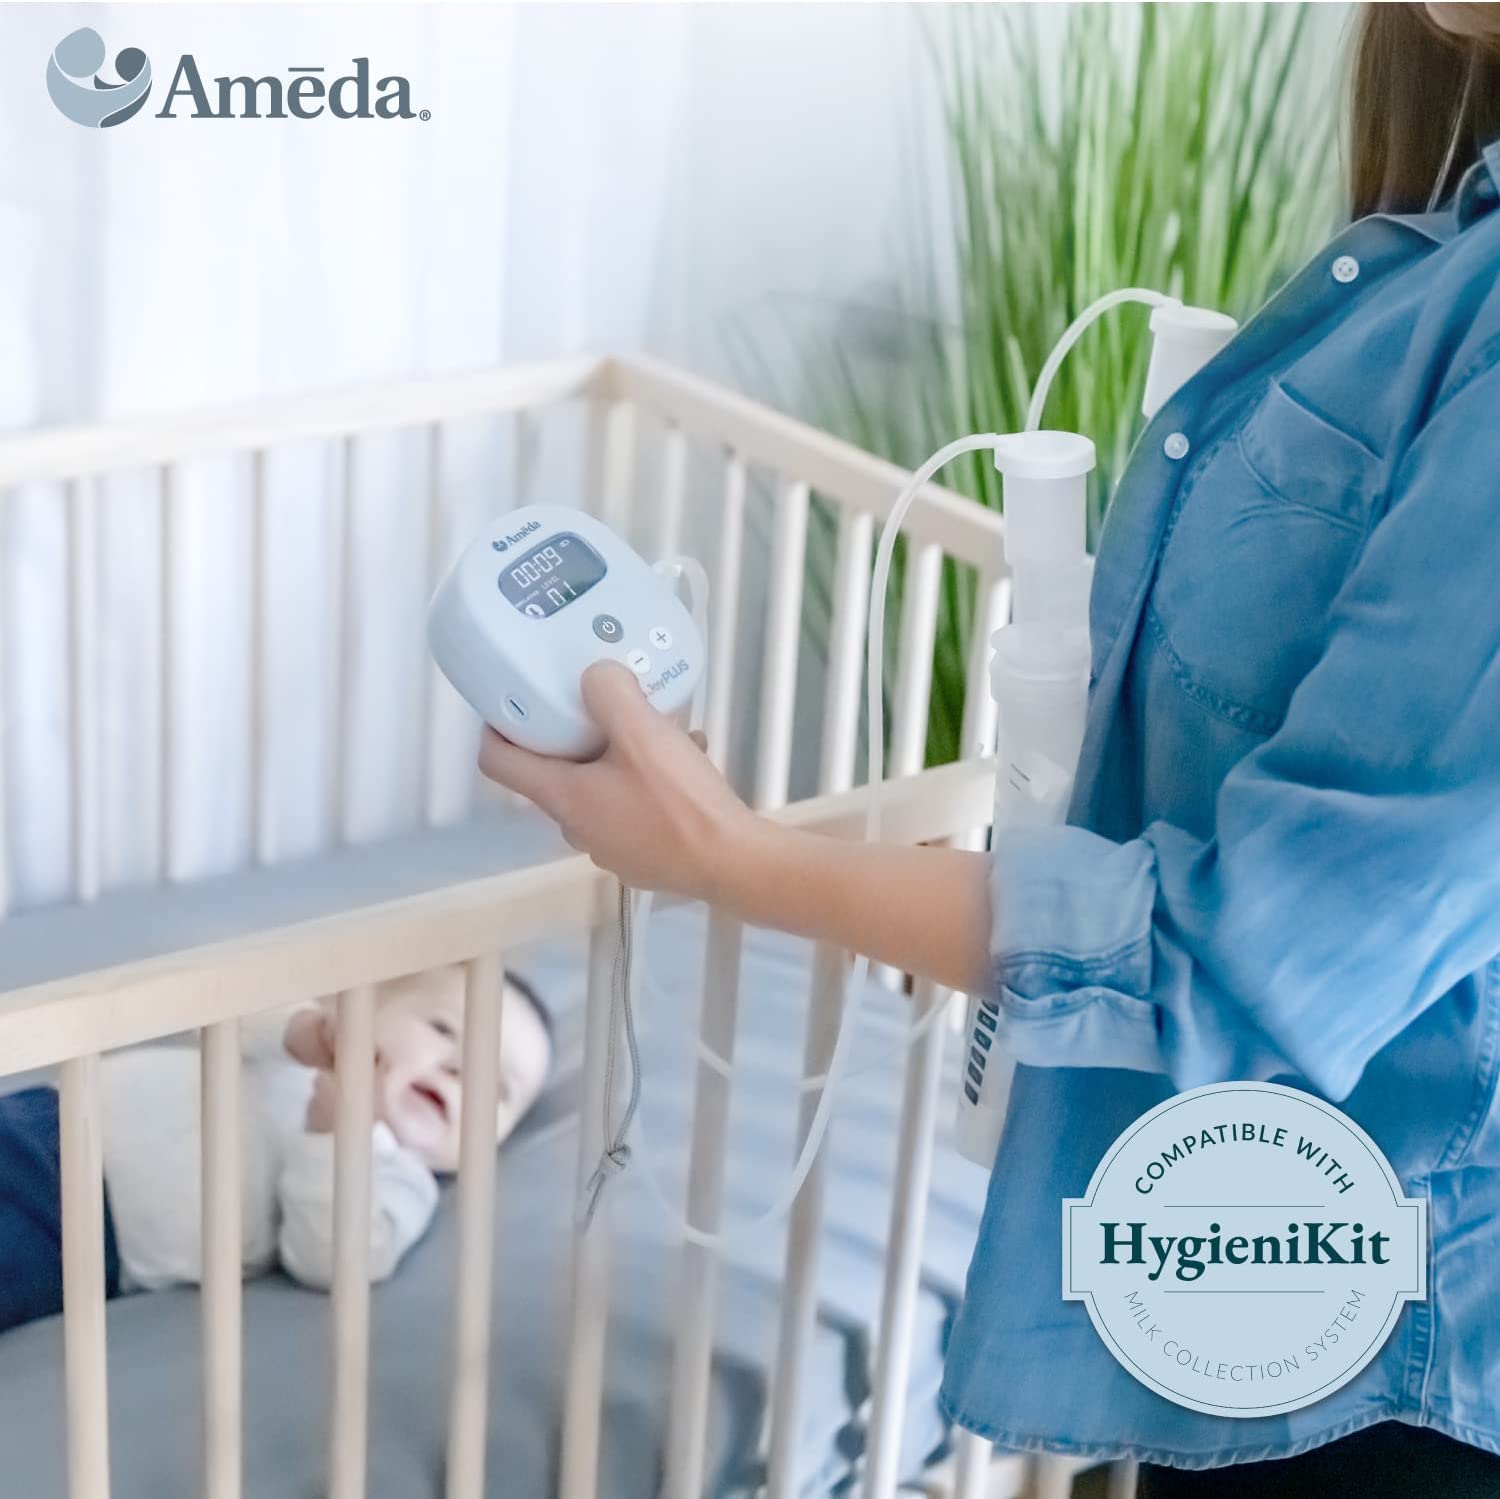 Ameda MYA Joy Plus Double Electric Rechargeable Breast Pump with Tote